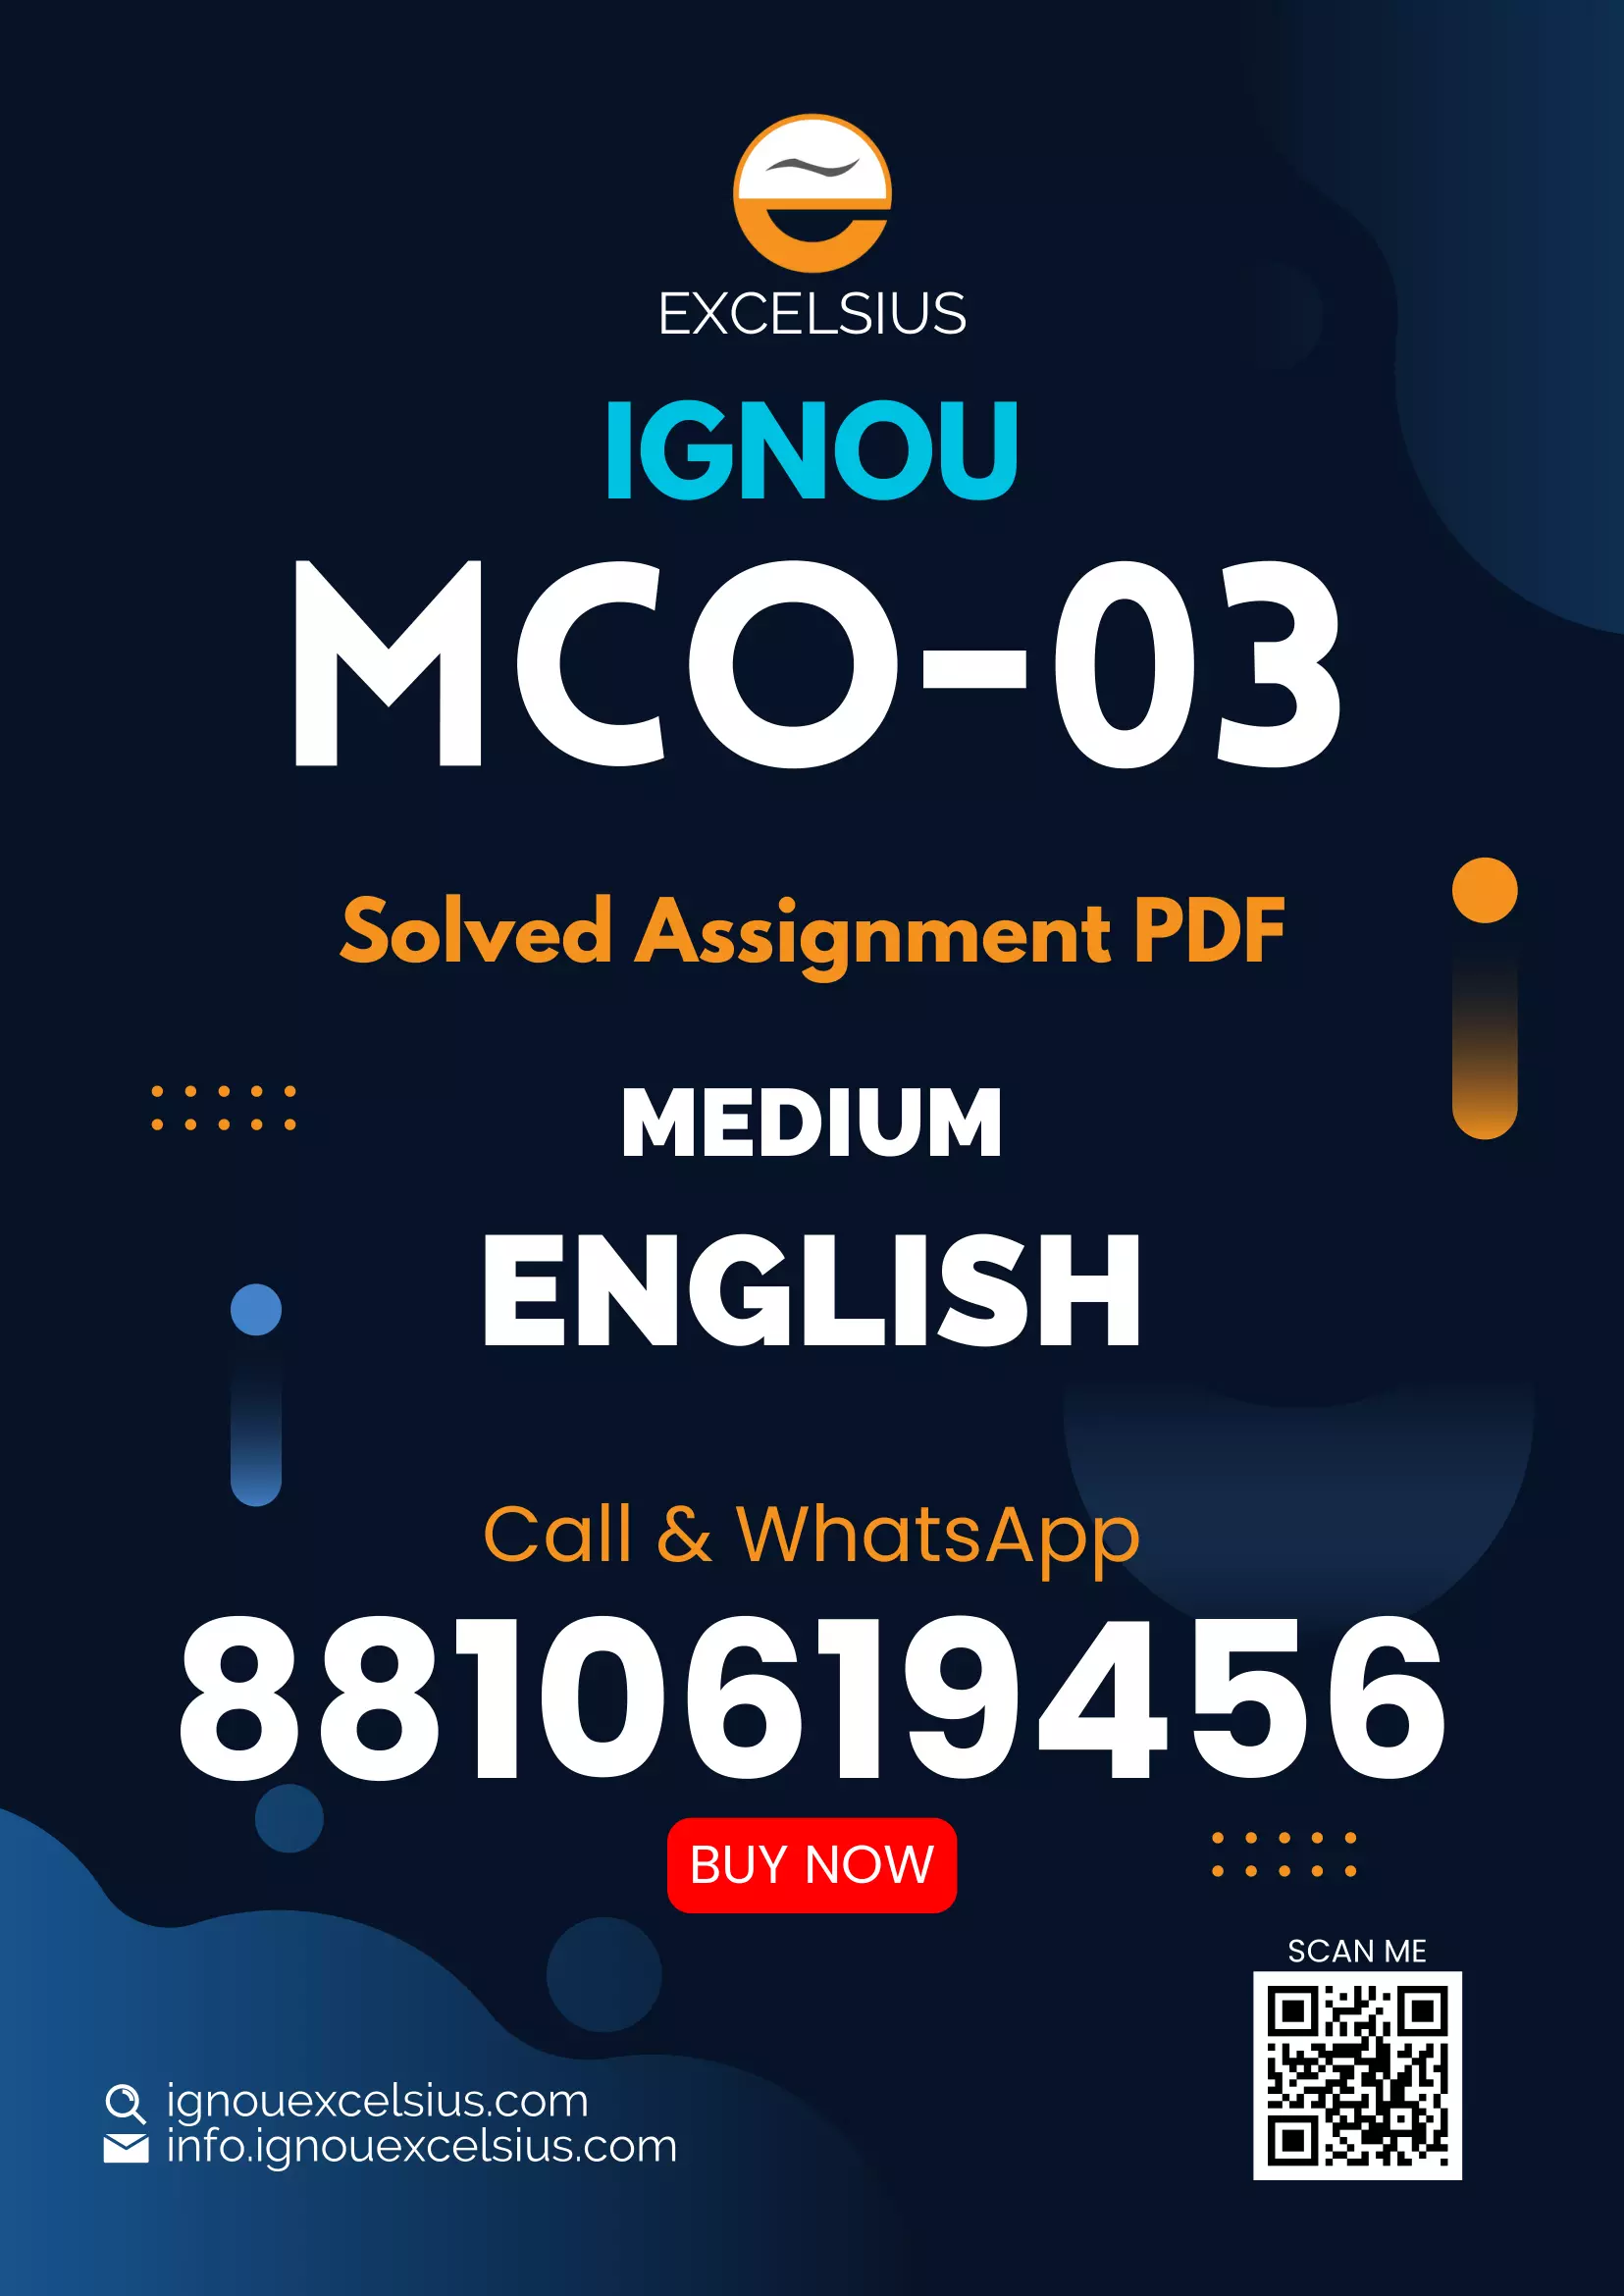 IGNOU MCO-03 - Research Methodology and Statistical Analysis, Latest Solved Assignment-July 2022 – January 2023